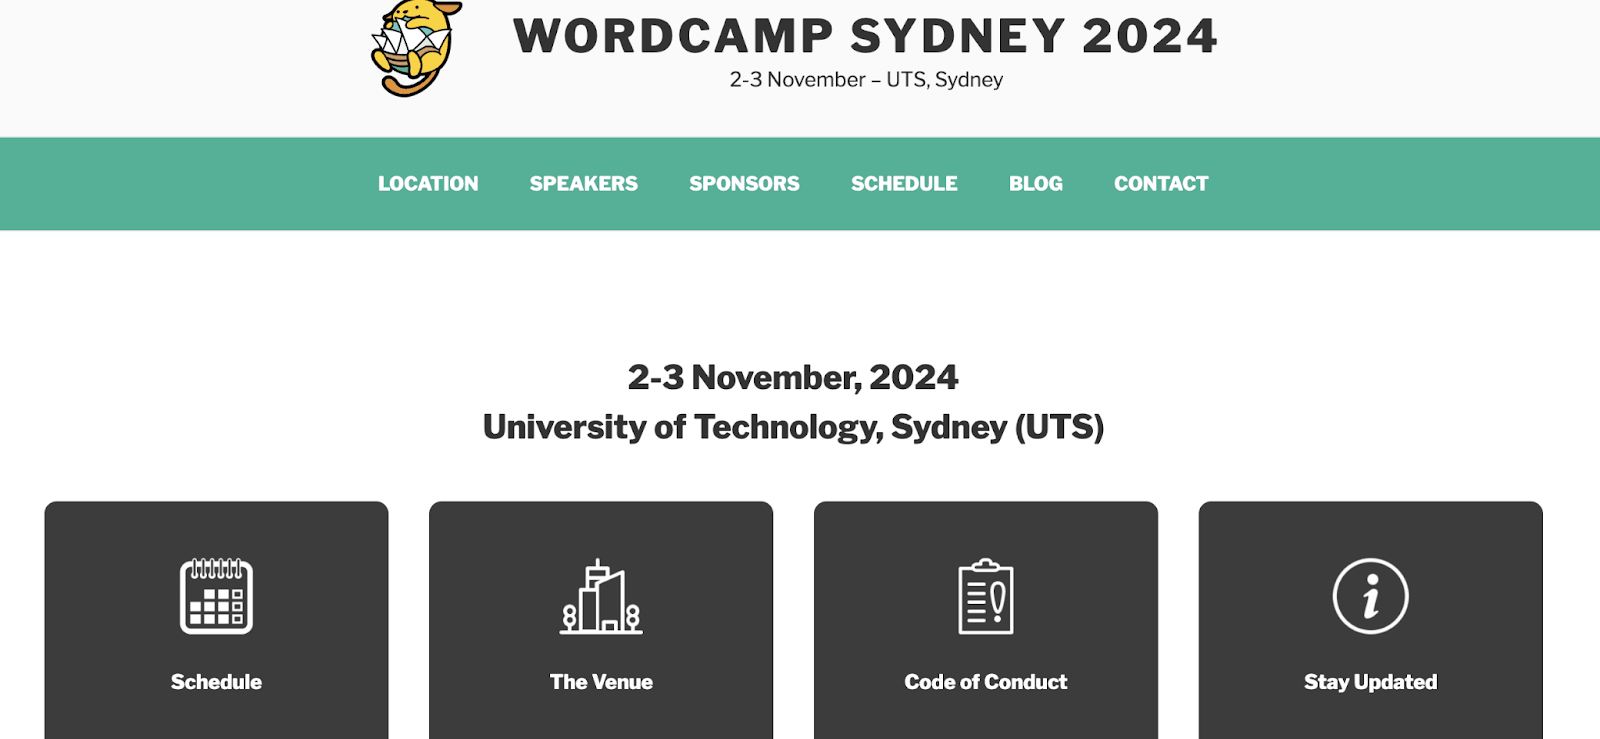 Upcoming WordCamp to attend